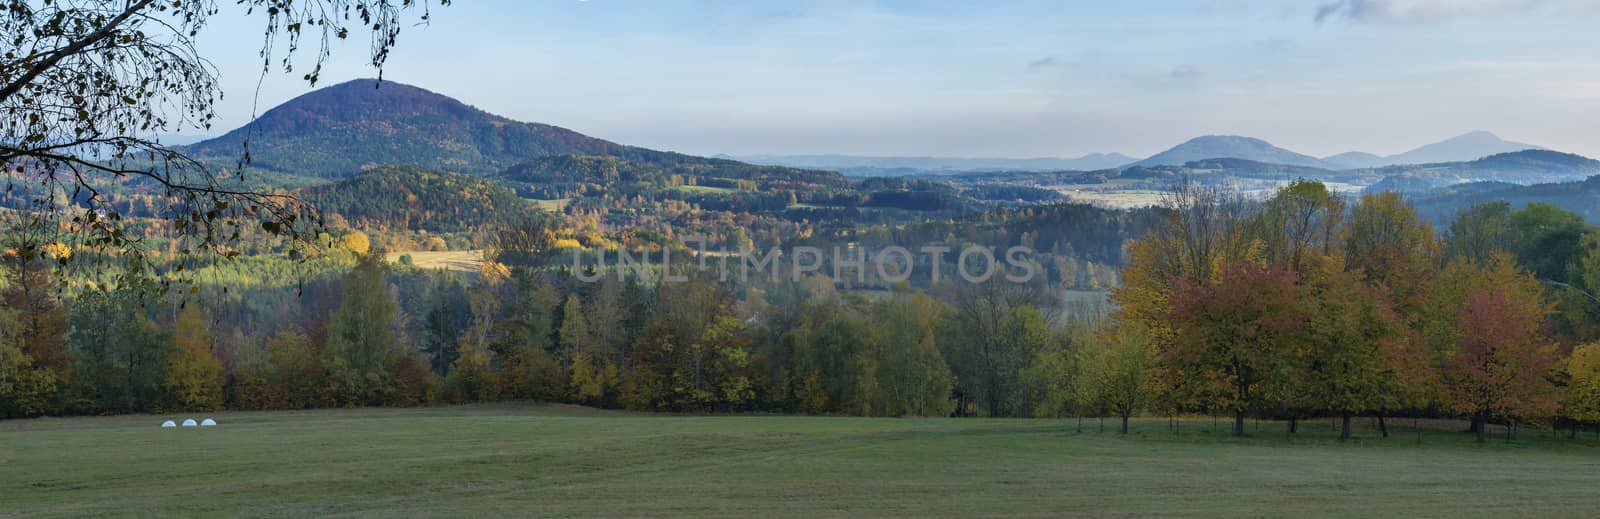 Panoramic Landscape in luzicke hory, Lusatian Mountains. Meadow, autumn colored deciduous and coniferous tree forest and green hills, blue sky background, golden hour.